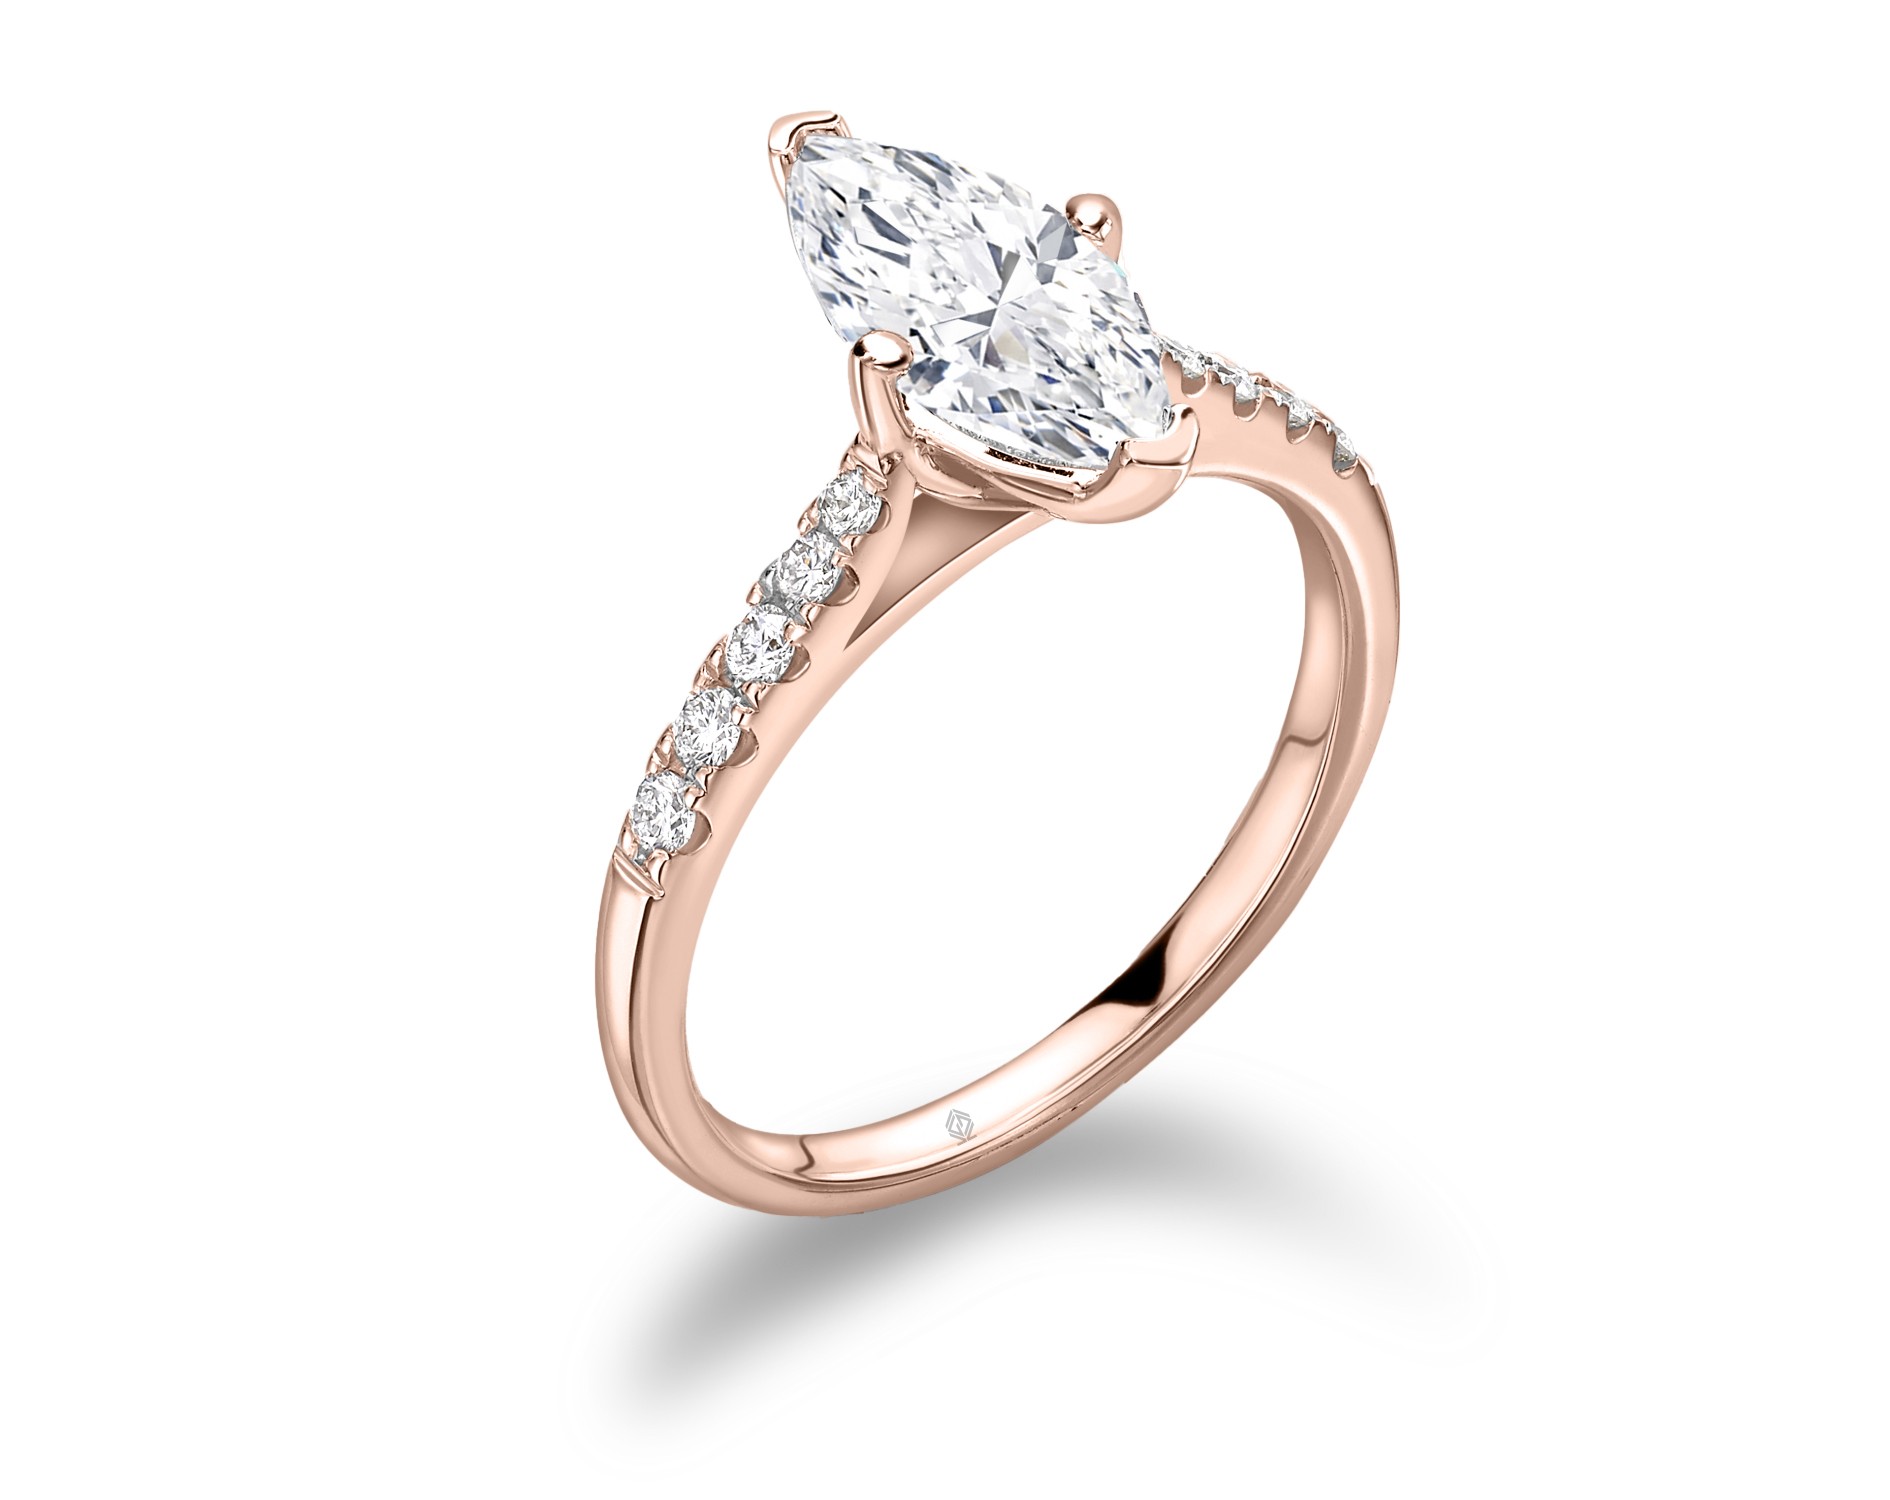 18K ROSE GOLD 2 PRONGS MARQUISE CUT DIAMOND ENGAGEMENT RING WITH SIDE STONES PAVE SET